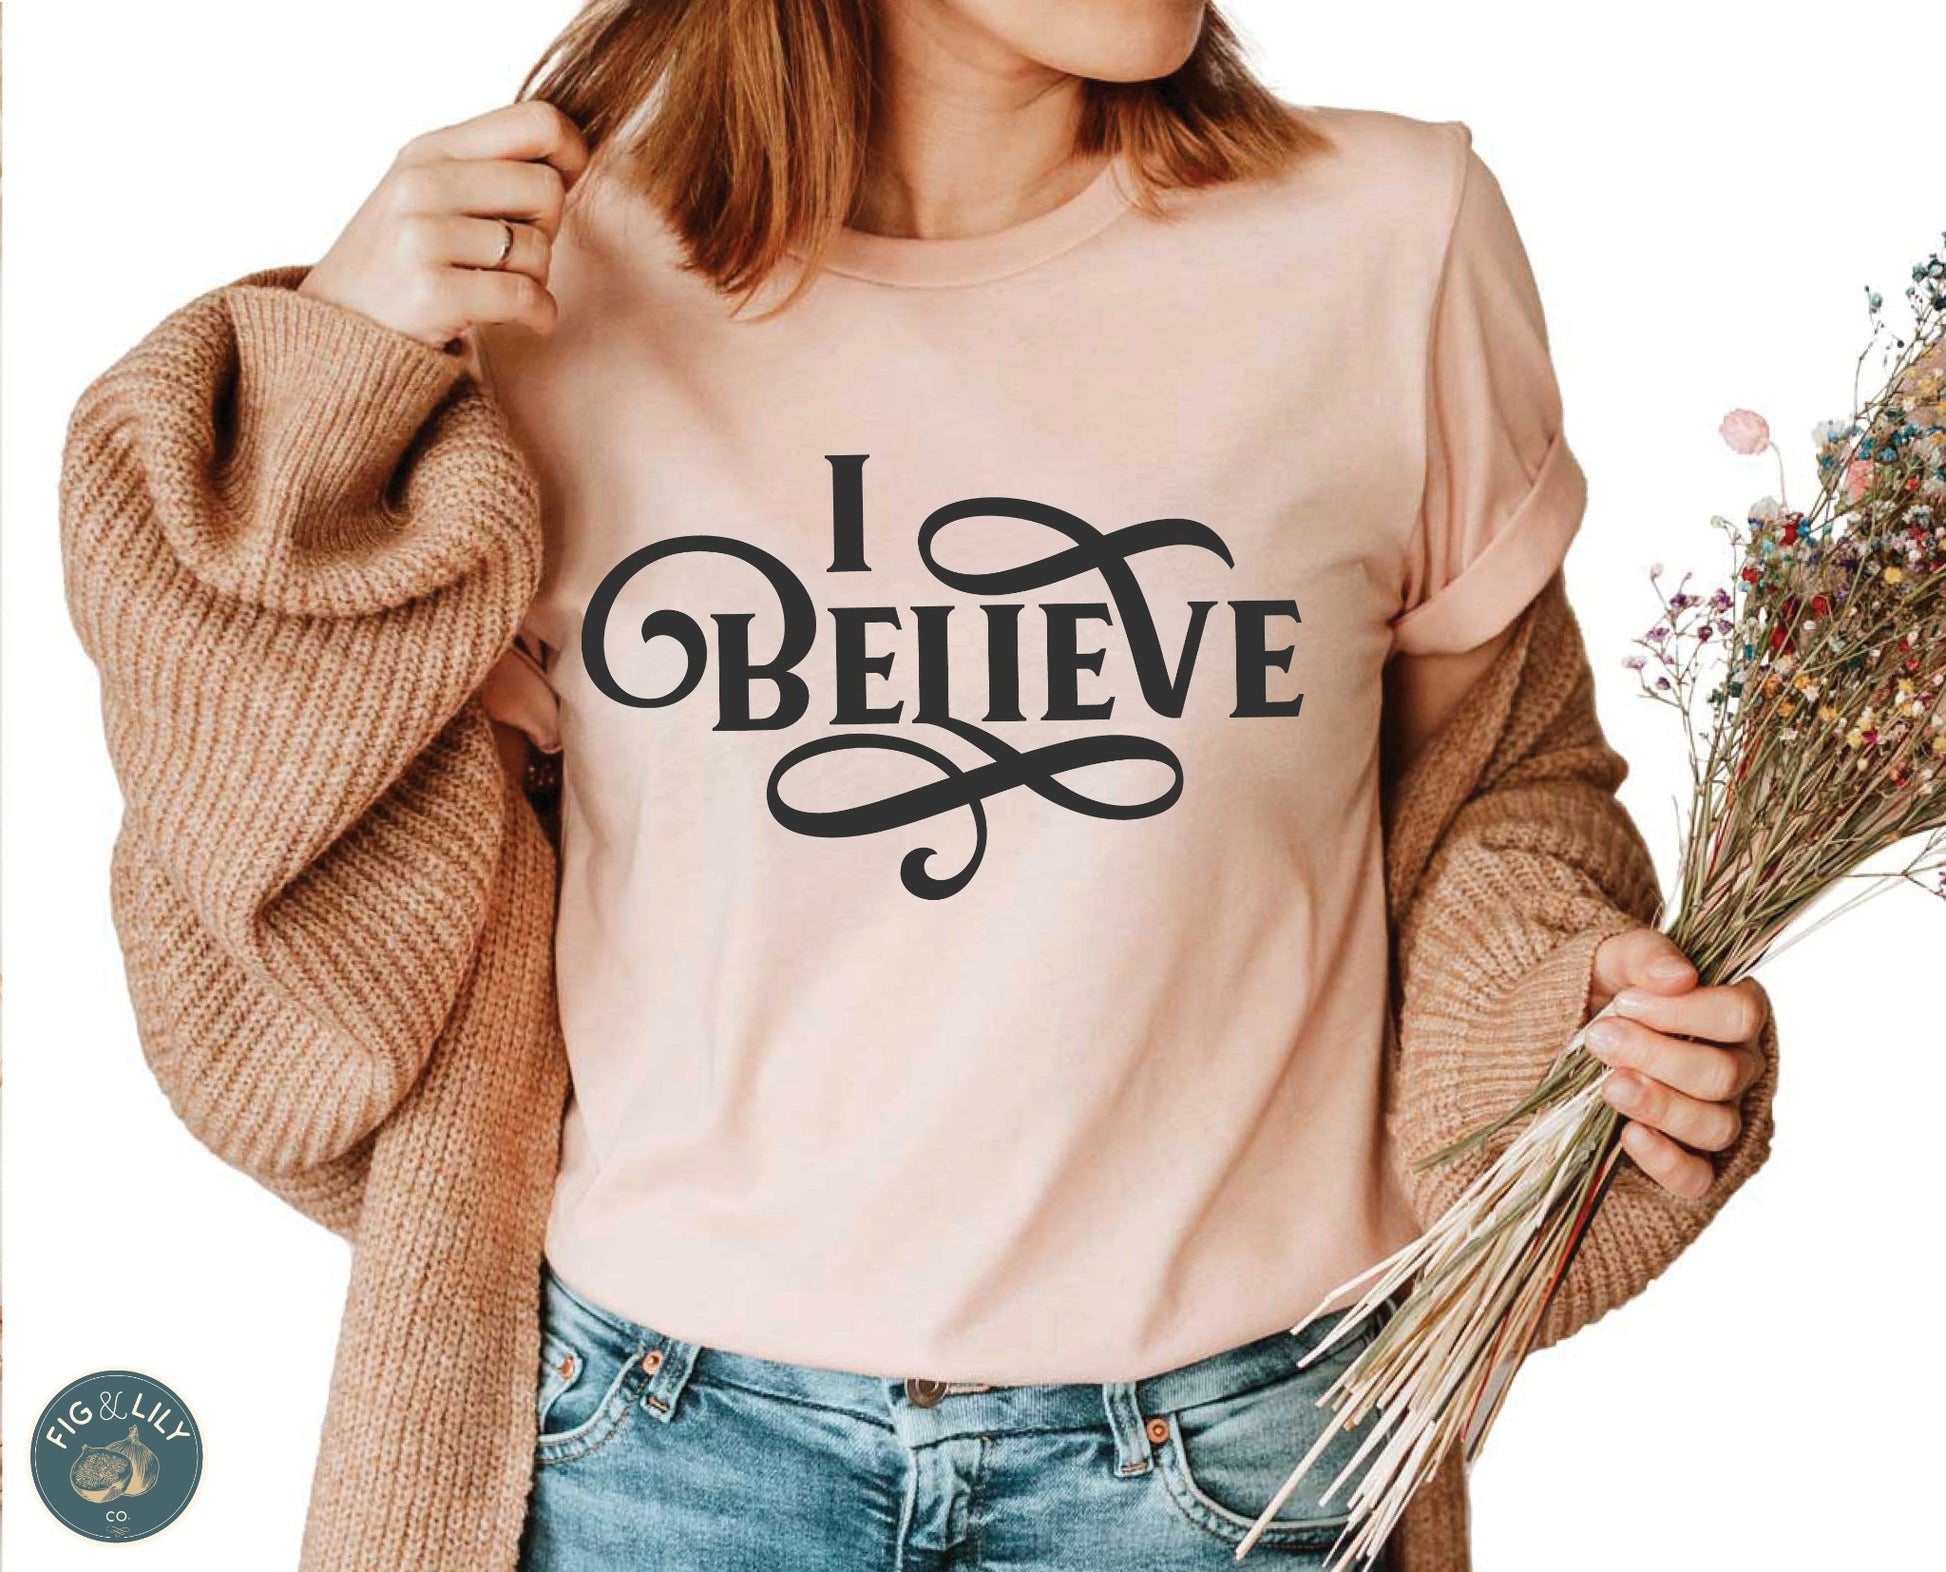 I Believe Swirl Christian aesthetic Jesus believer t-shirt design printed in black on soft heather prism peach tee for women, great gift for her